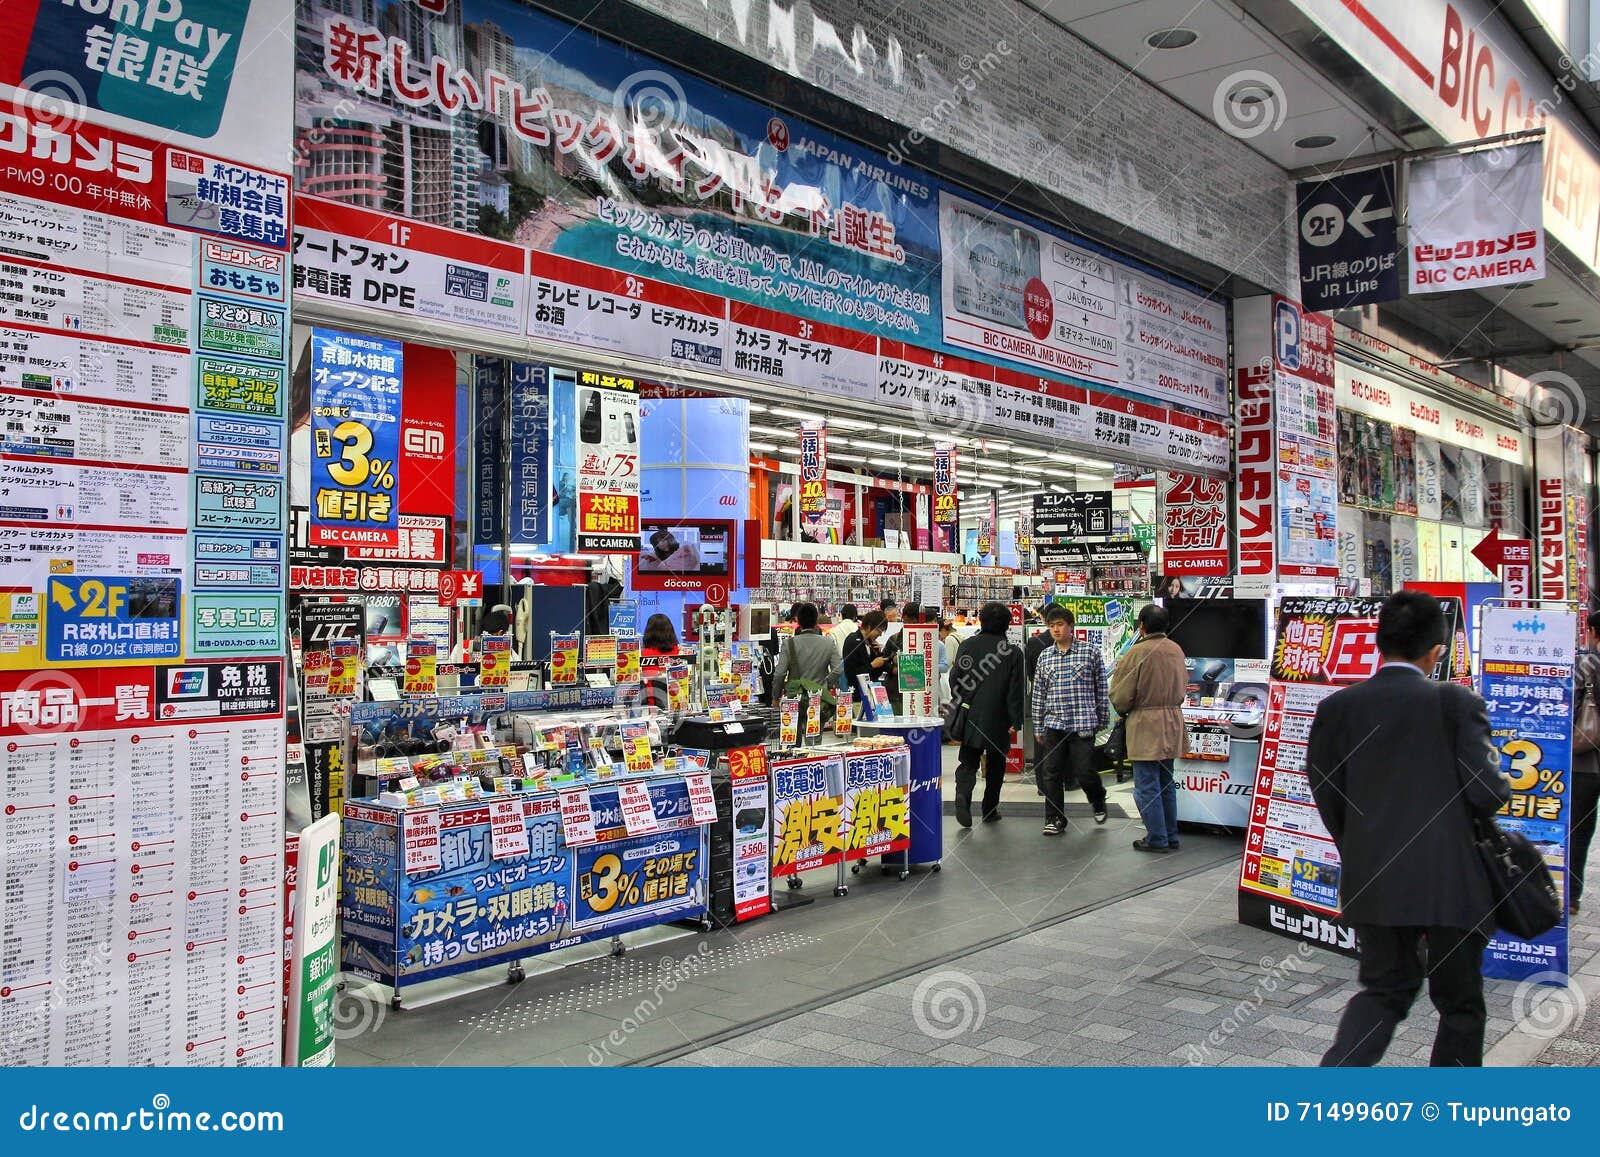 655 Electronics Store Japan Photos Free Royalty Free Stock Photos From Dreamstime